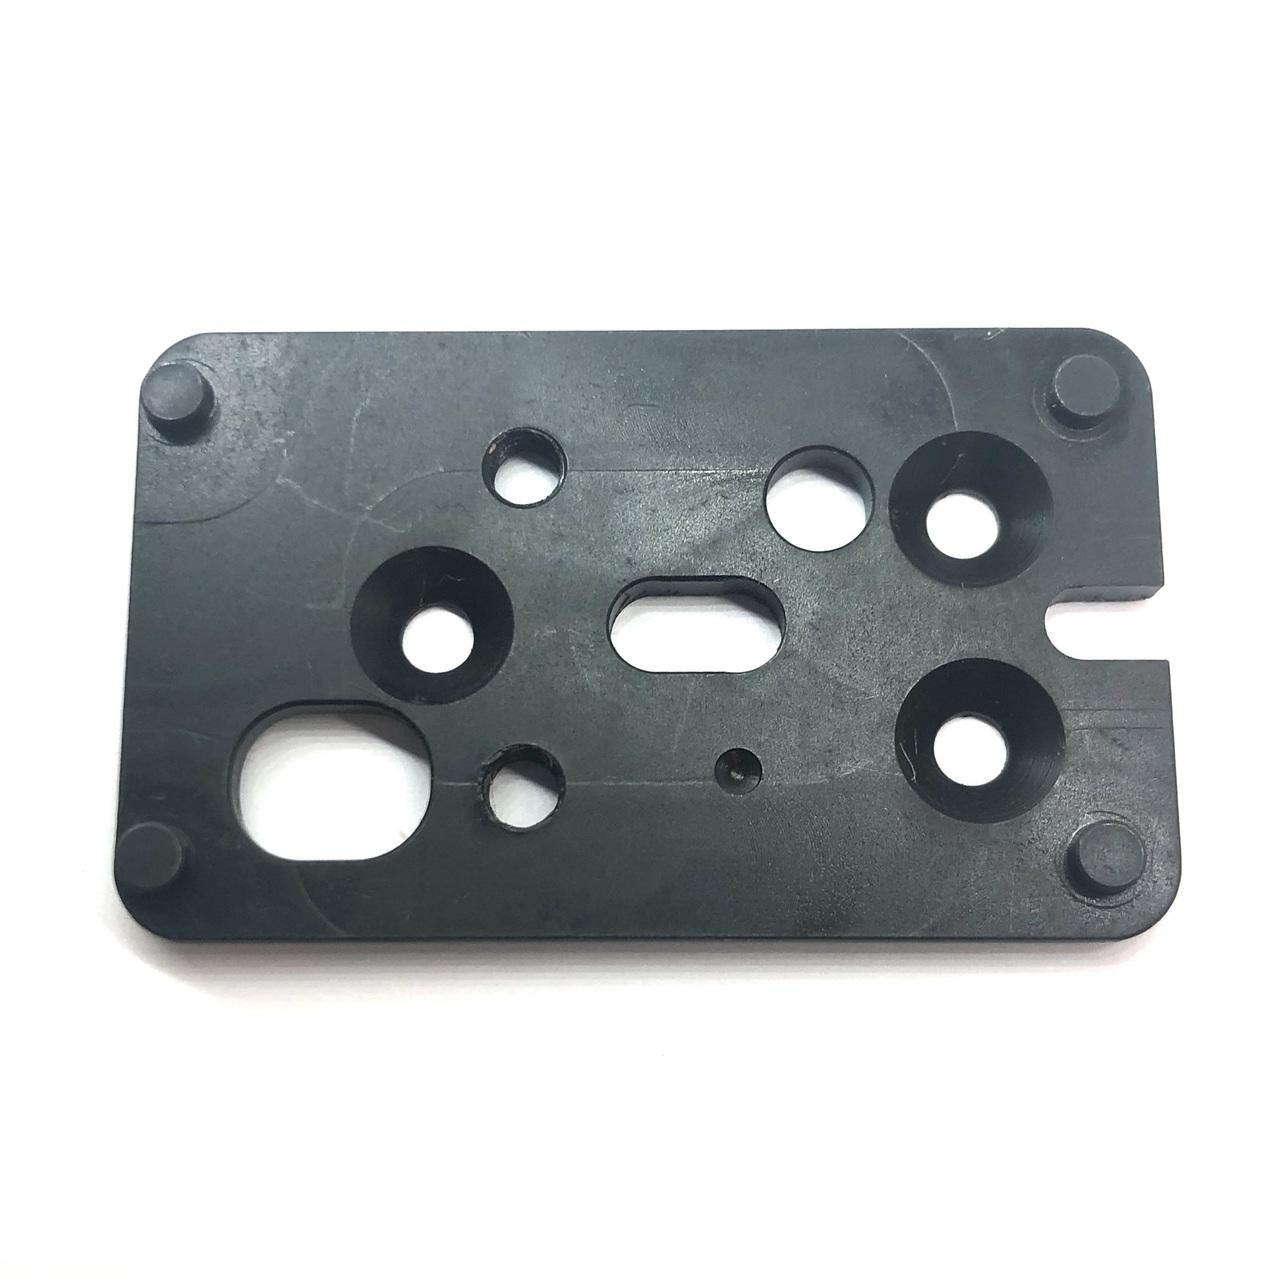 Powder River Precision PRP #1 Low Mounted Plate XD and XDM